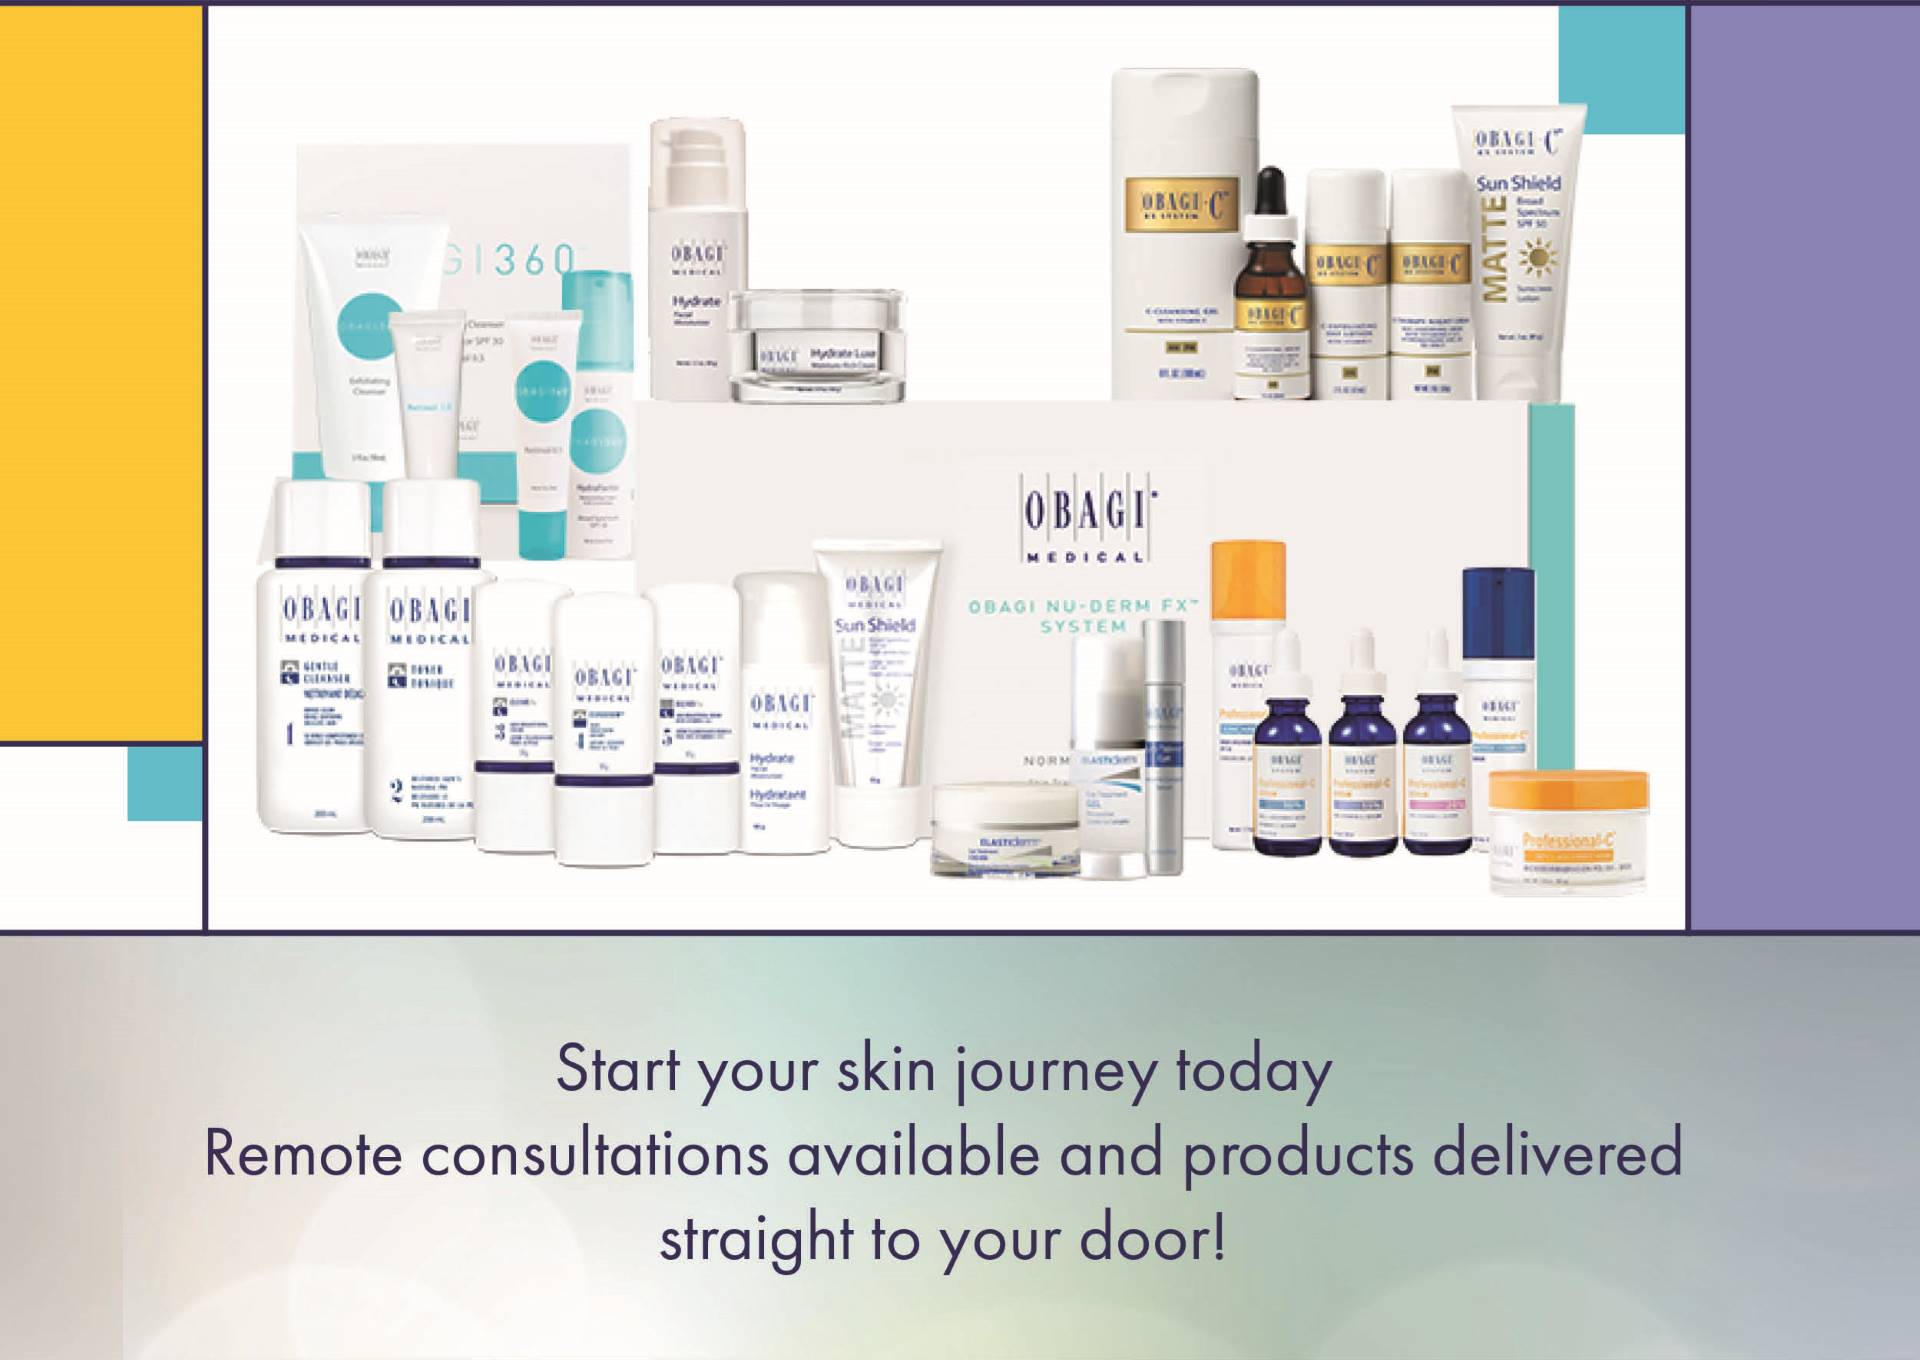 Obagi Online Consultations and Product Delivery